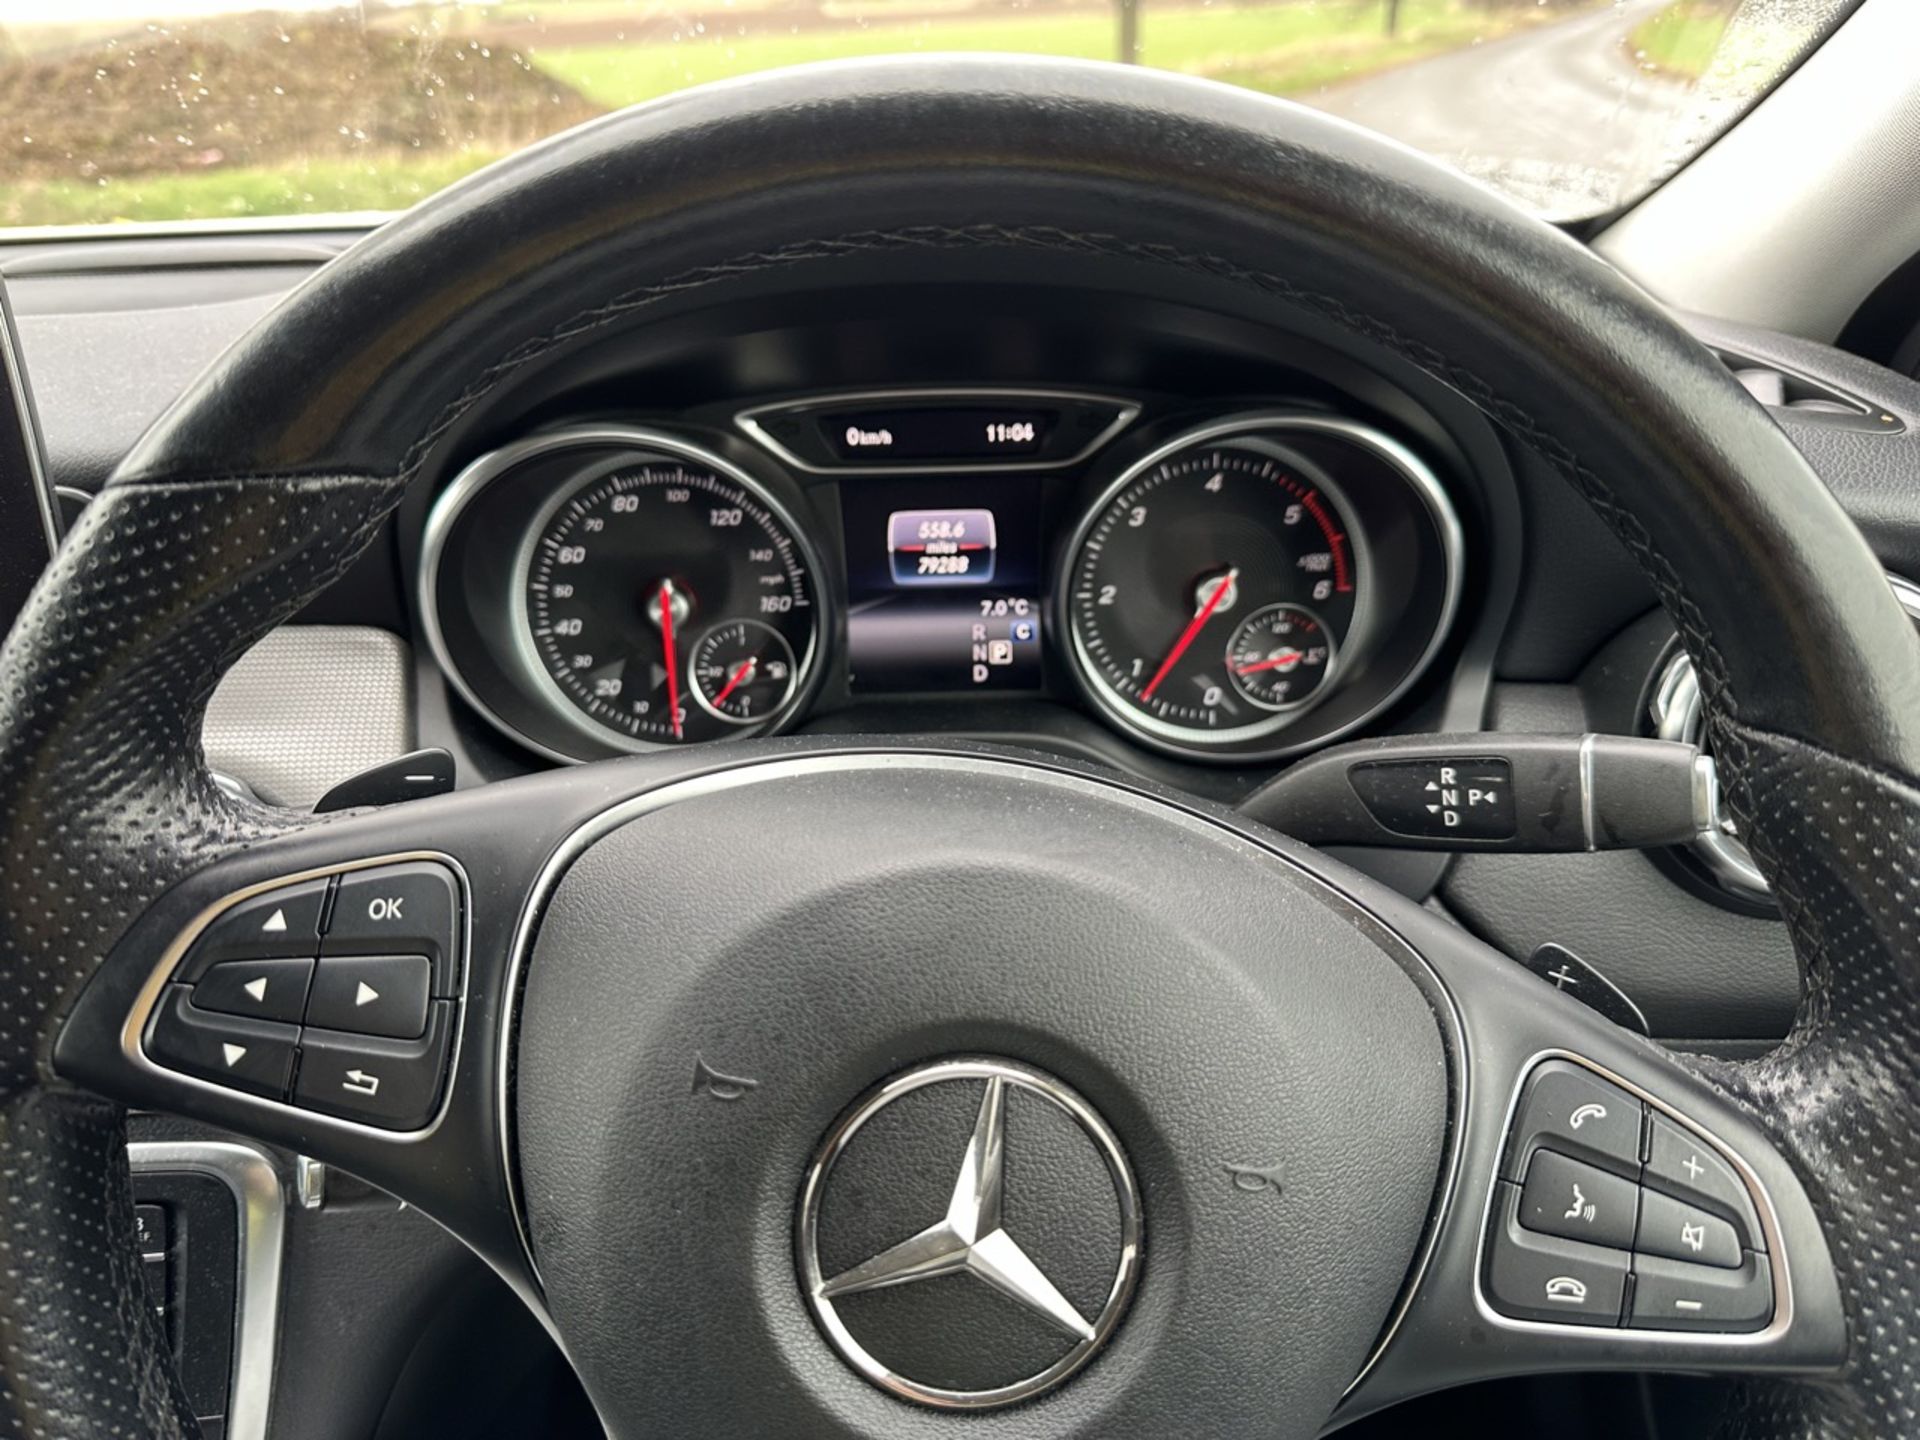 MERCEDES GLA 200d AUTO "SPORT EXECUTIVE" 2019 MODEL - LEATHER - LOW MILES - AIR CON - Image 16 of 17